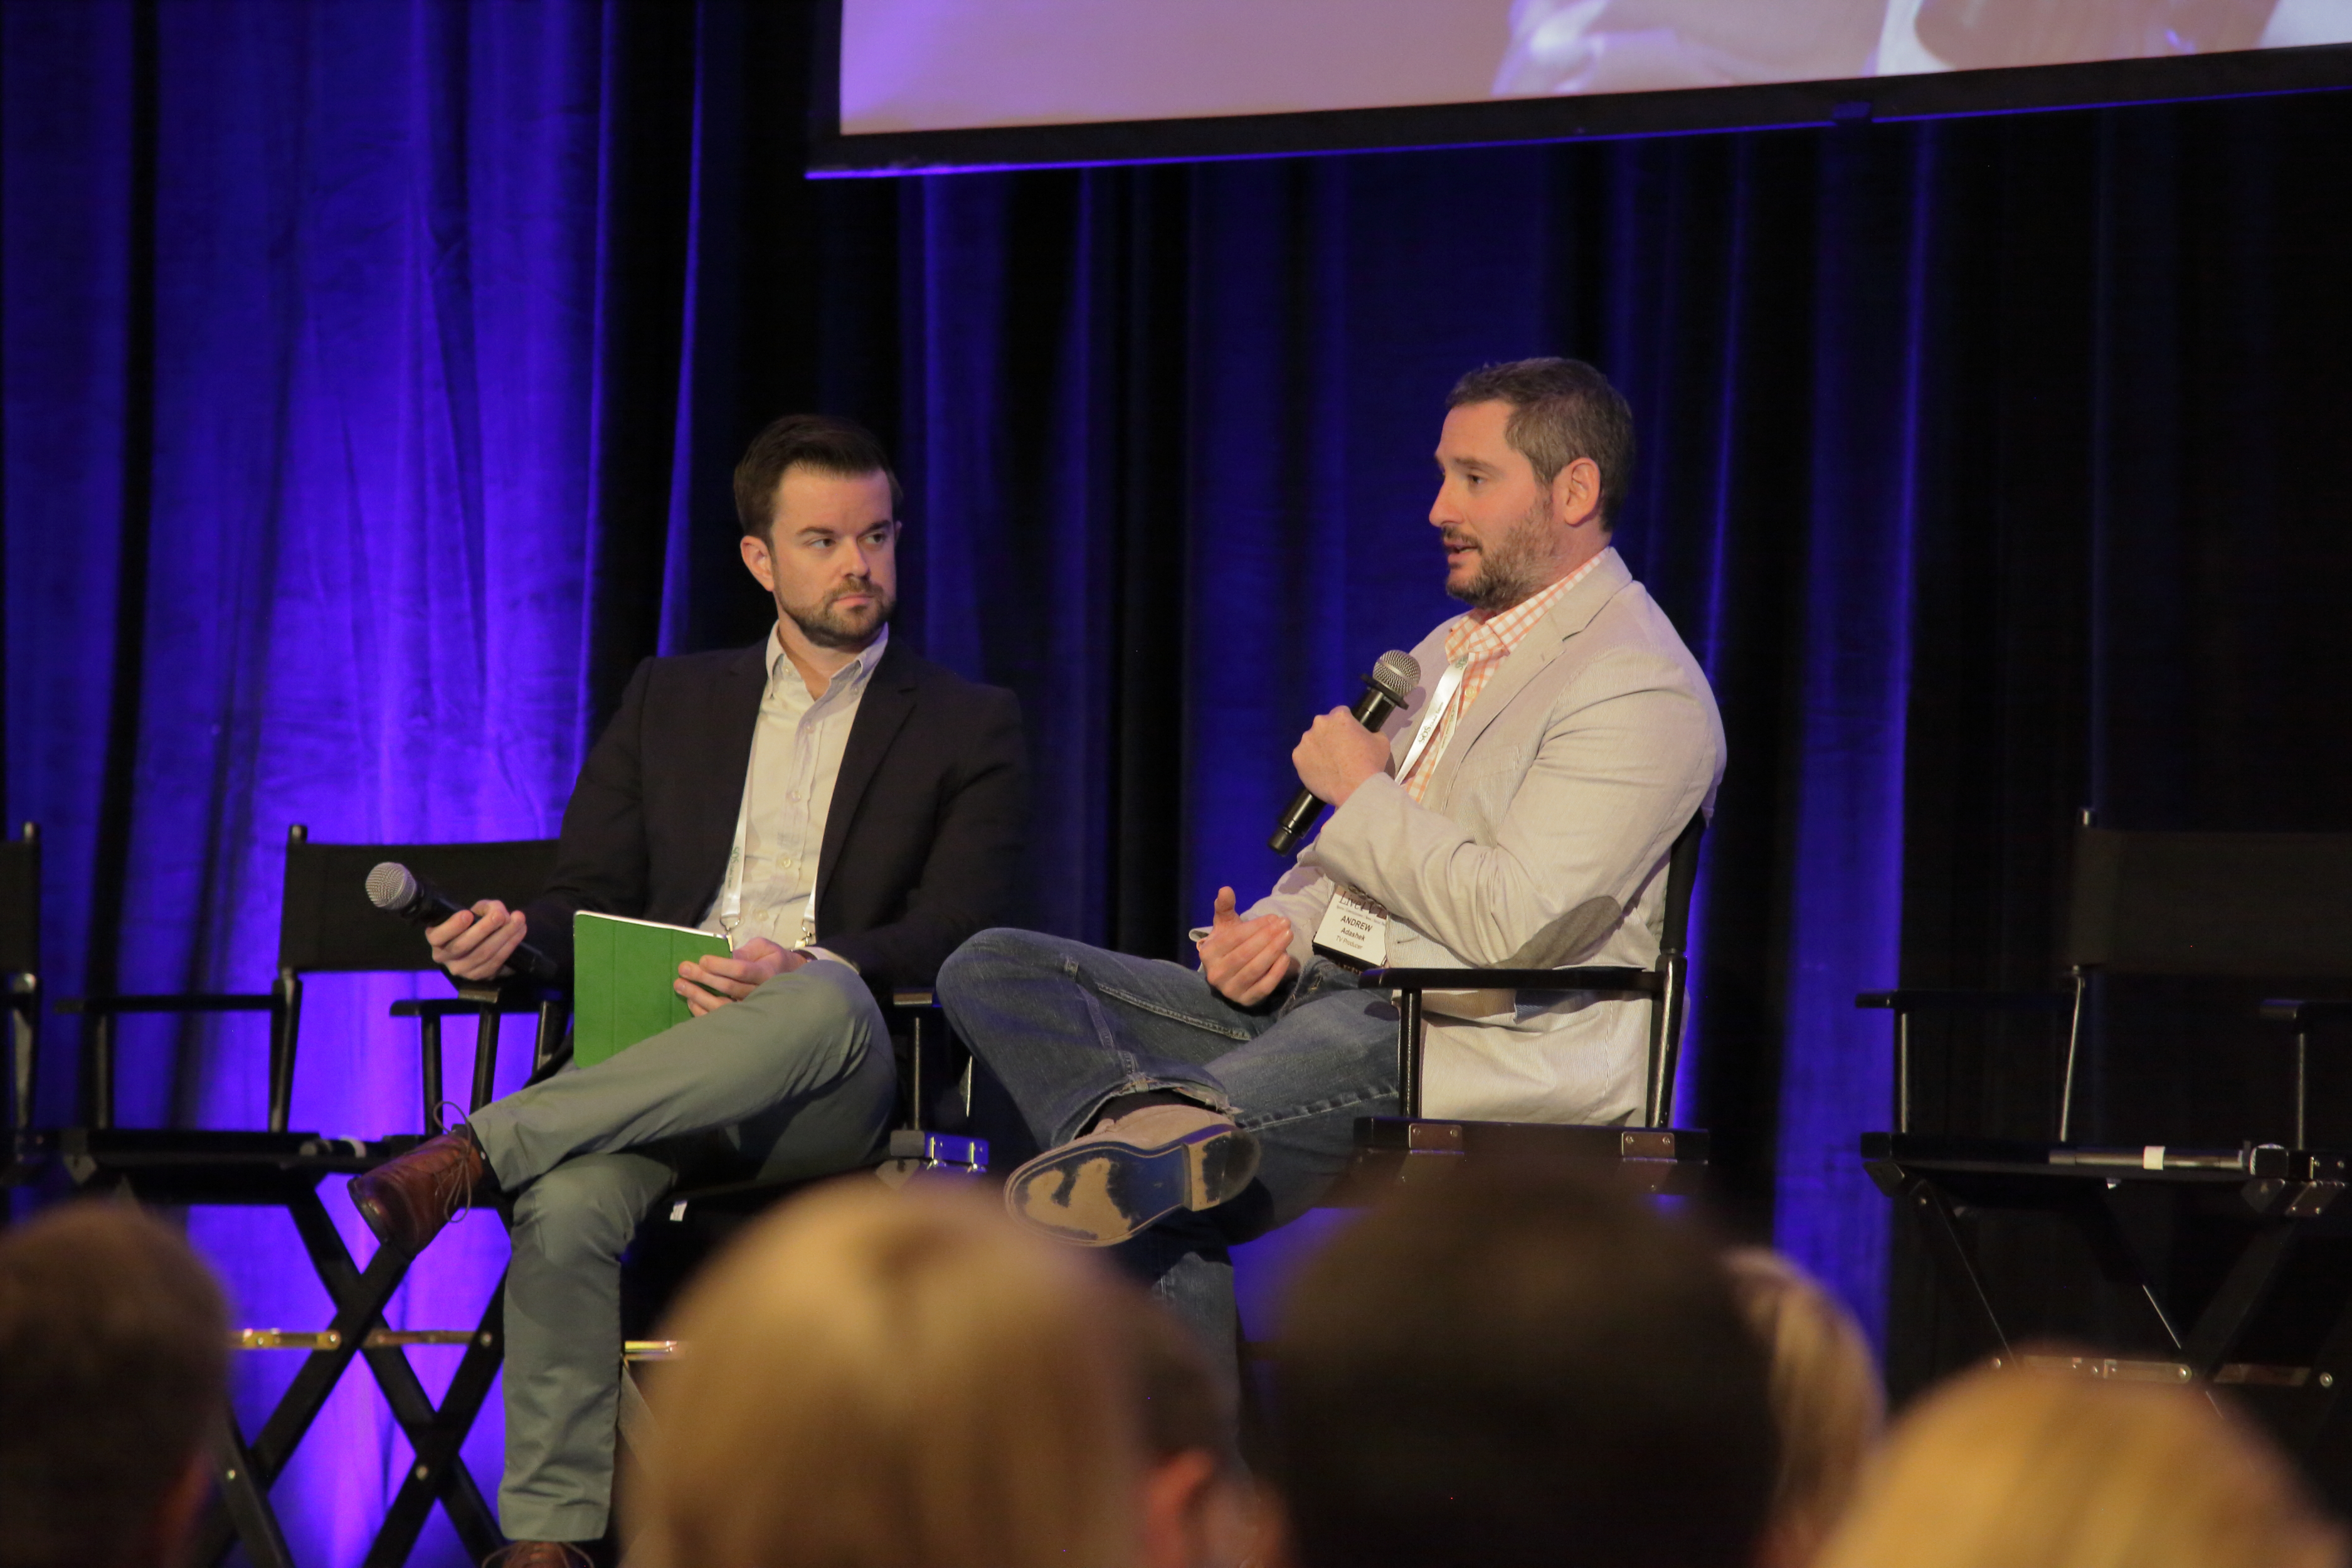 Andrew Adashek (right) spoke on his experiences at Twitter, The Voice, and more during a keynote conversation with SVG's Brandon Costa.